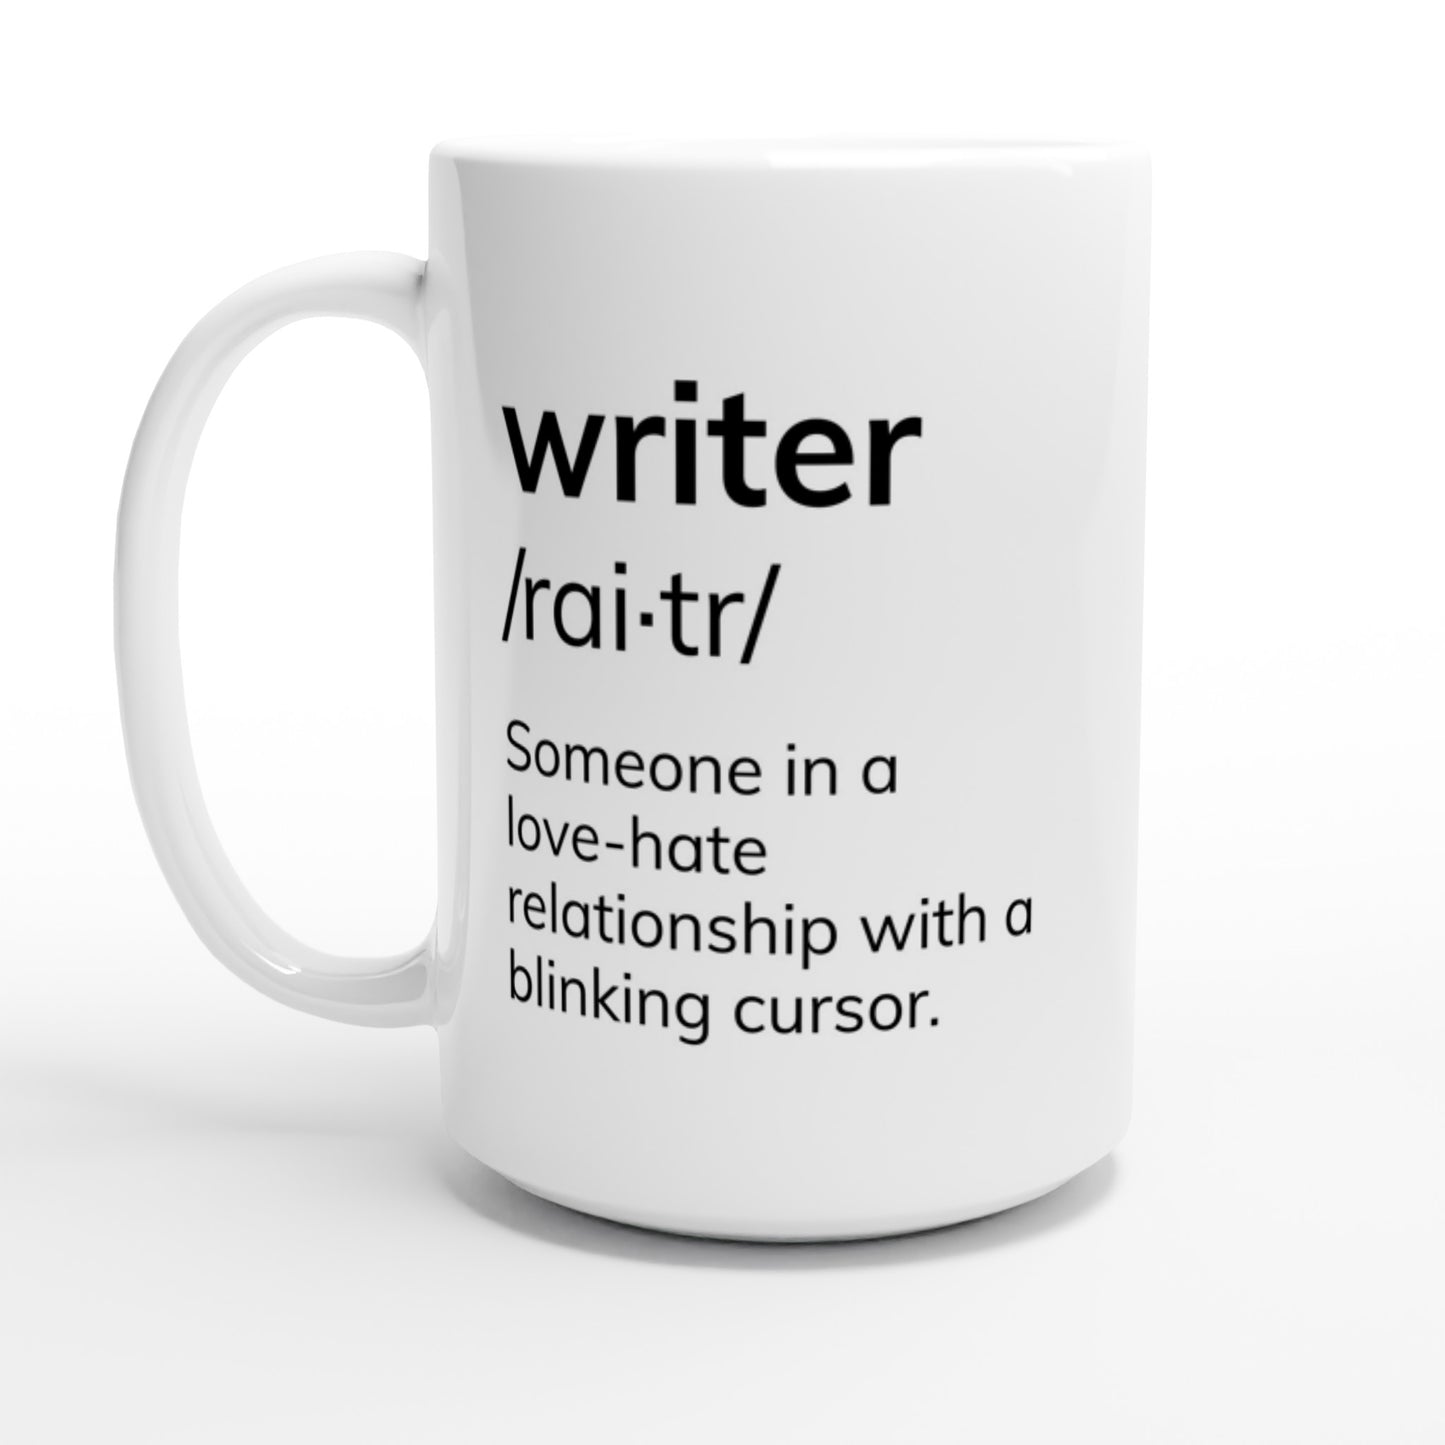 Writing-Related Coffee Mug // Writer: Someone in a love-hate relationship with a blinking cursor